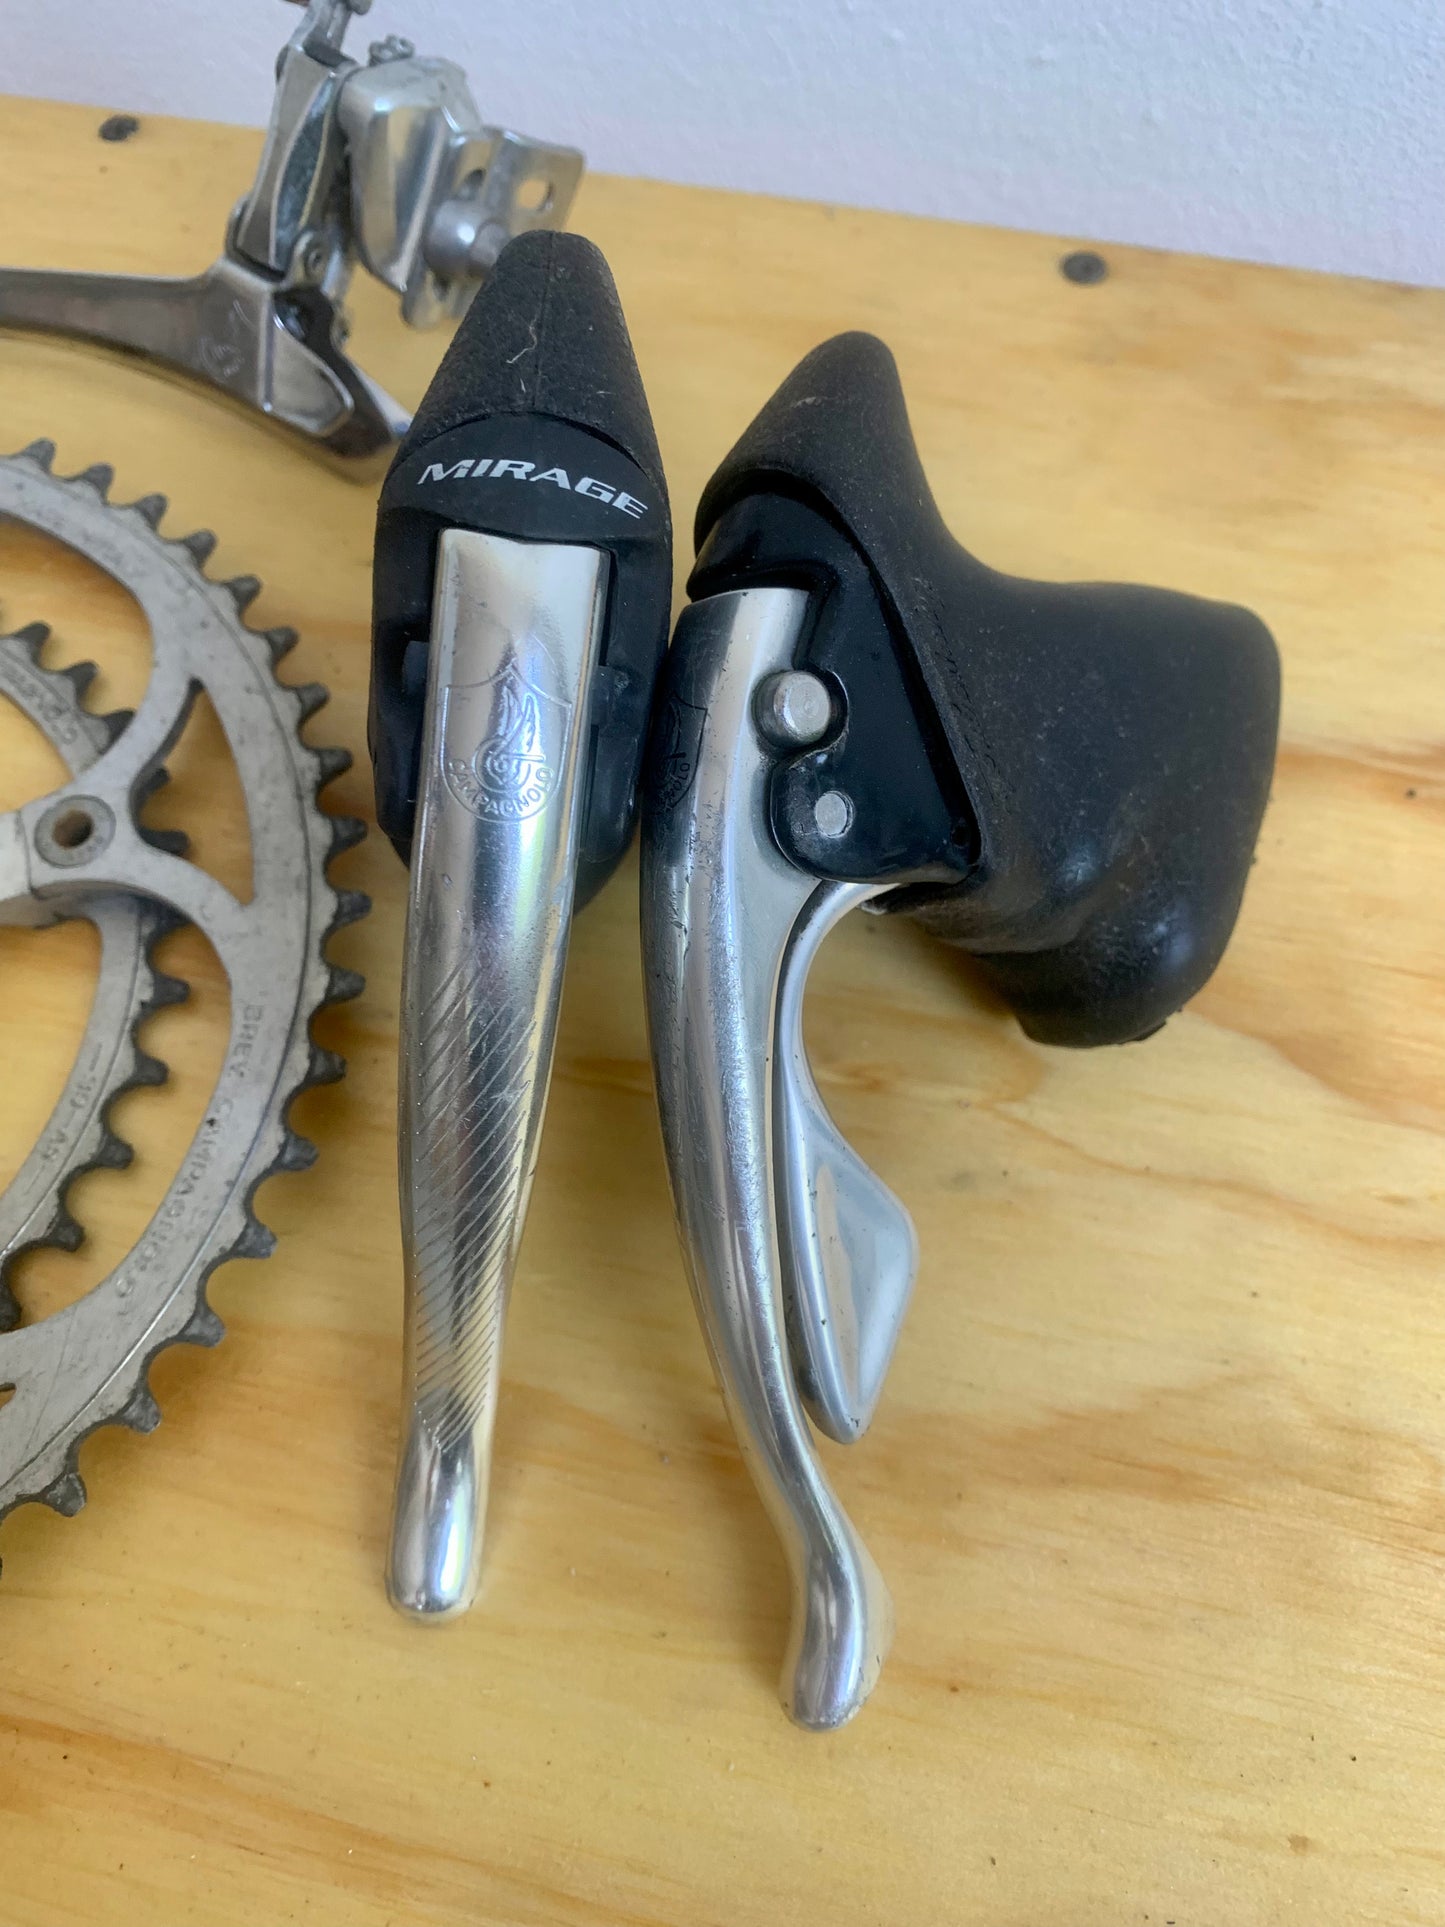 Campagnolo Mirage 8x2 groupset